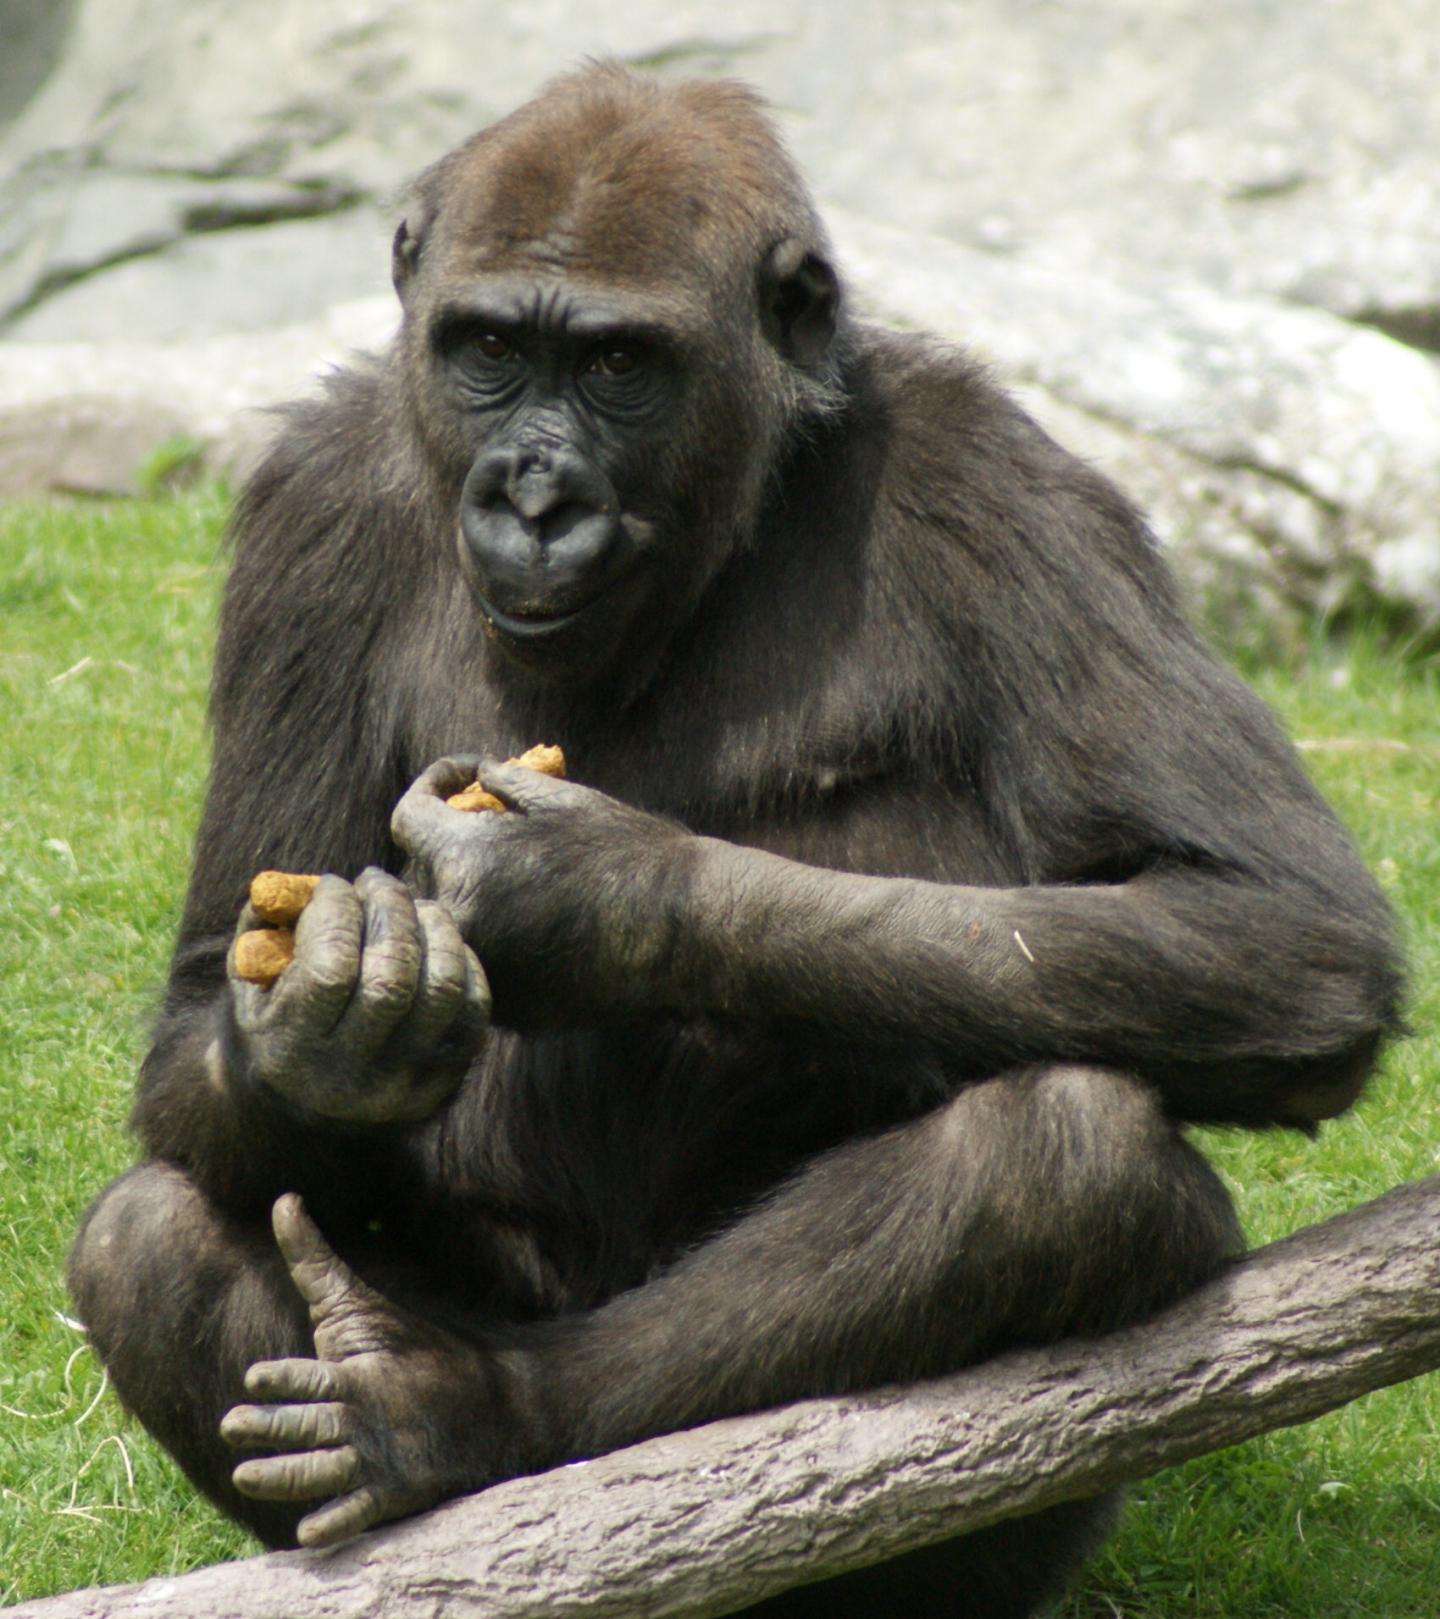 A More Accurate Understanding of the Gorilla Genome (2 of 2)